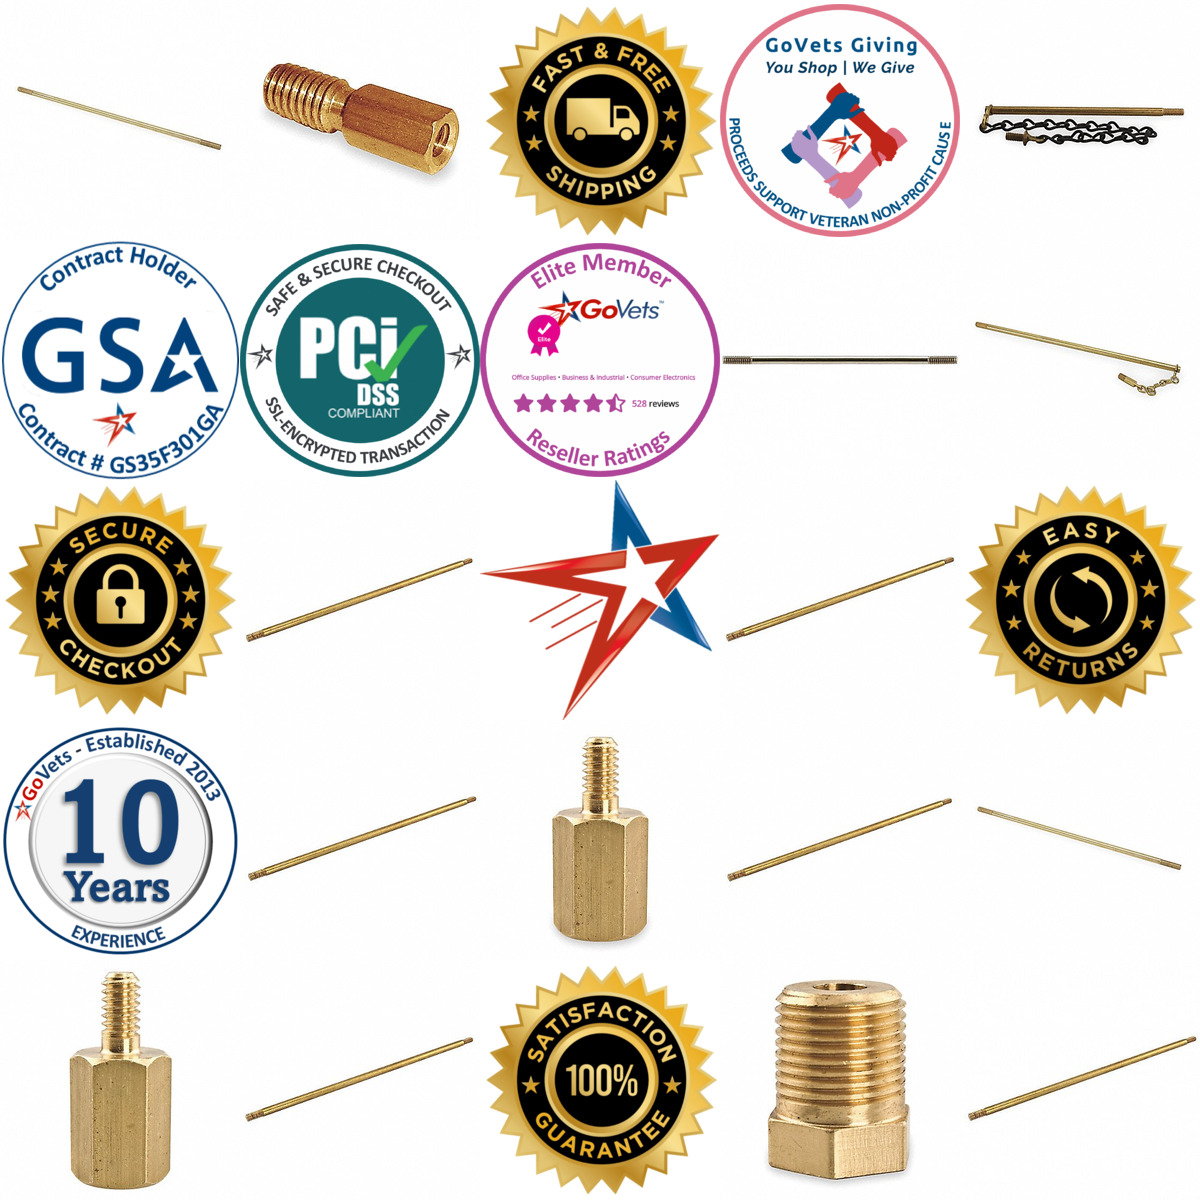 A selection of Float Rods Adapters and Nuzzle Assemblies products on GoVets